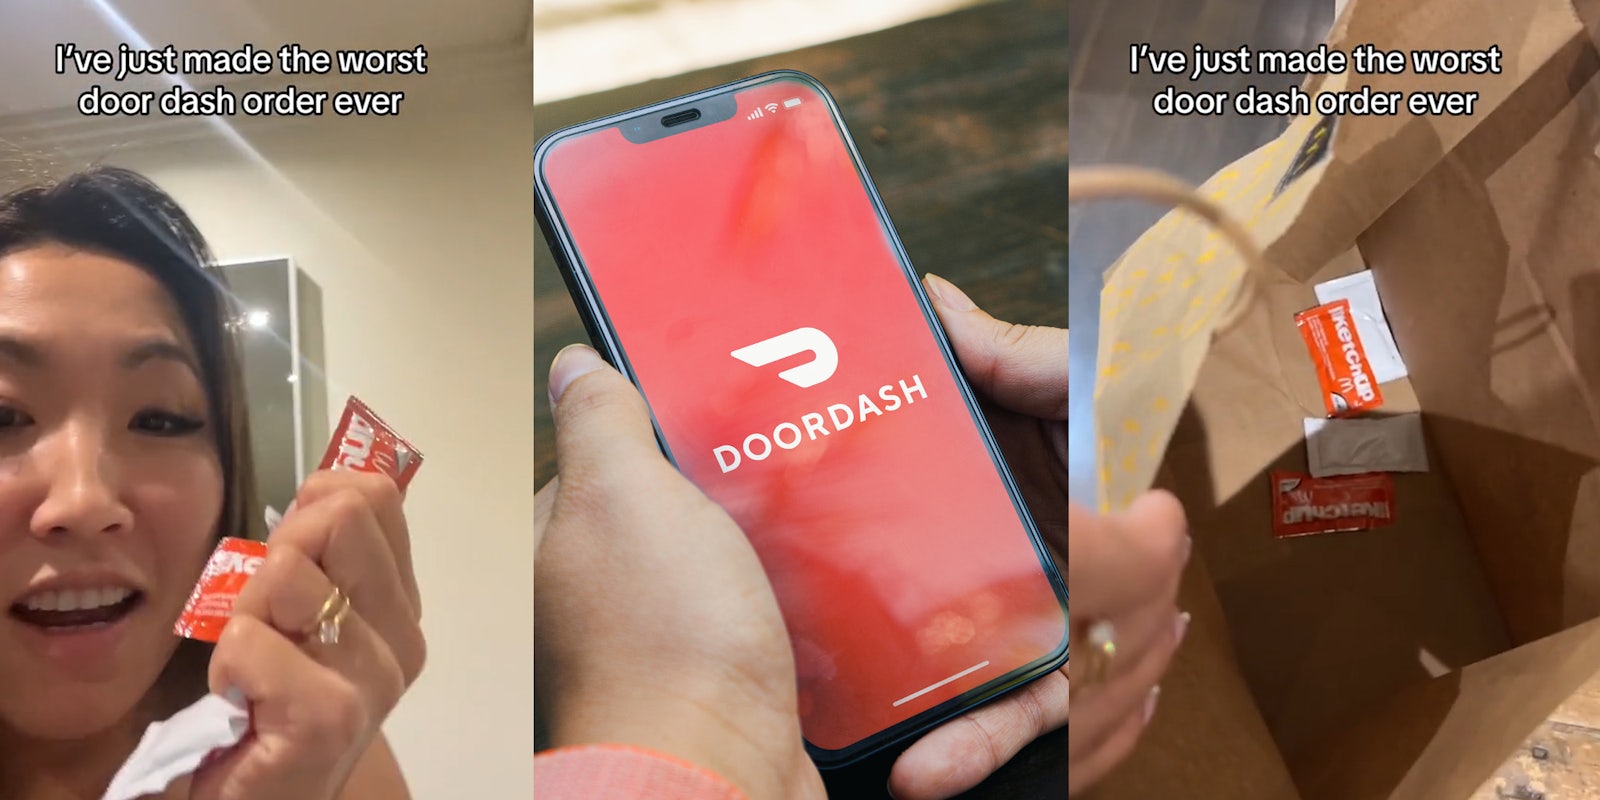 DoorDash customer speaking holding ketchup packets with caption 'I've just made the worst door dash order ever' (l) DoorDash on phone screen in hands in front of wooden background (c) DoorDash customer opening bag to reveal ketchup packets with caption 'I've just made the worst door dash order ever' (r)